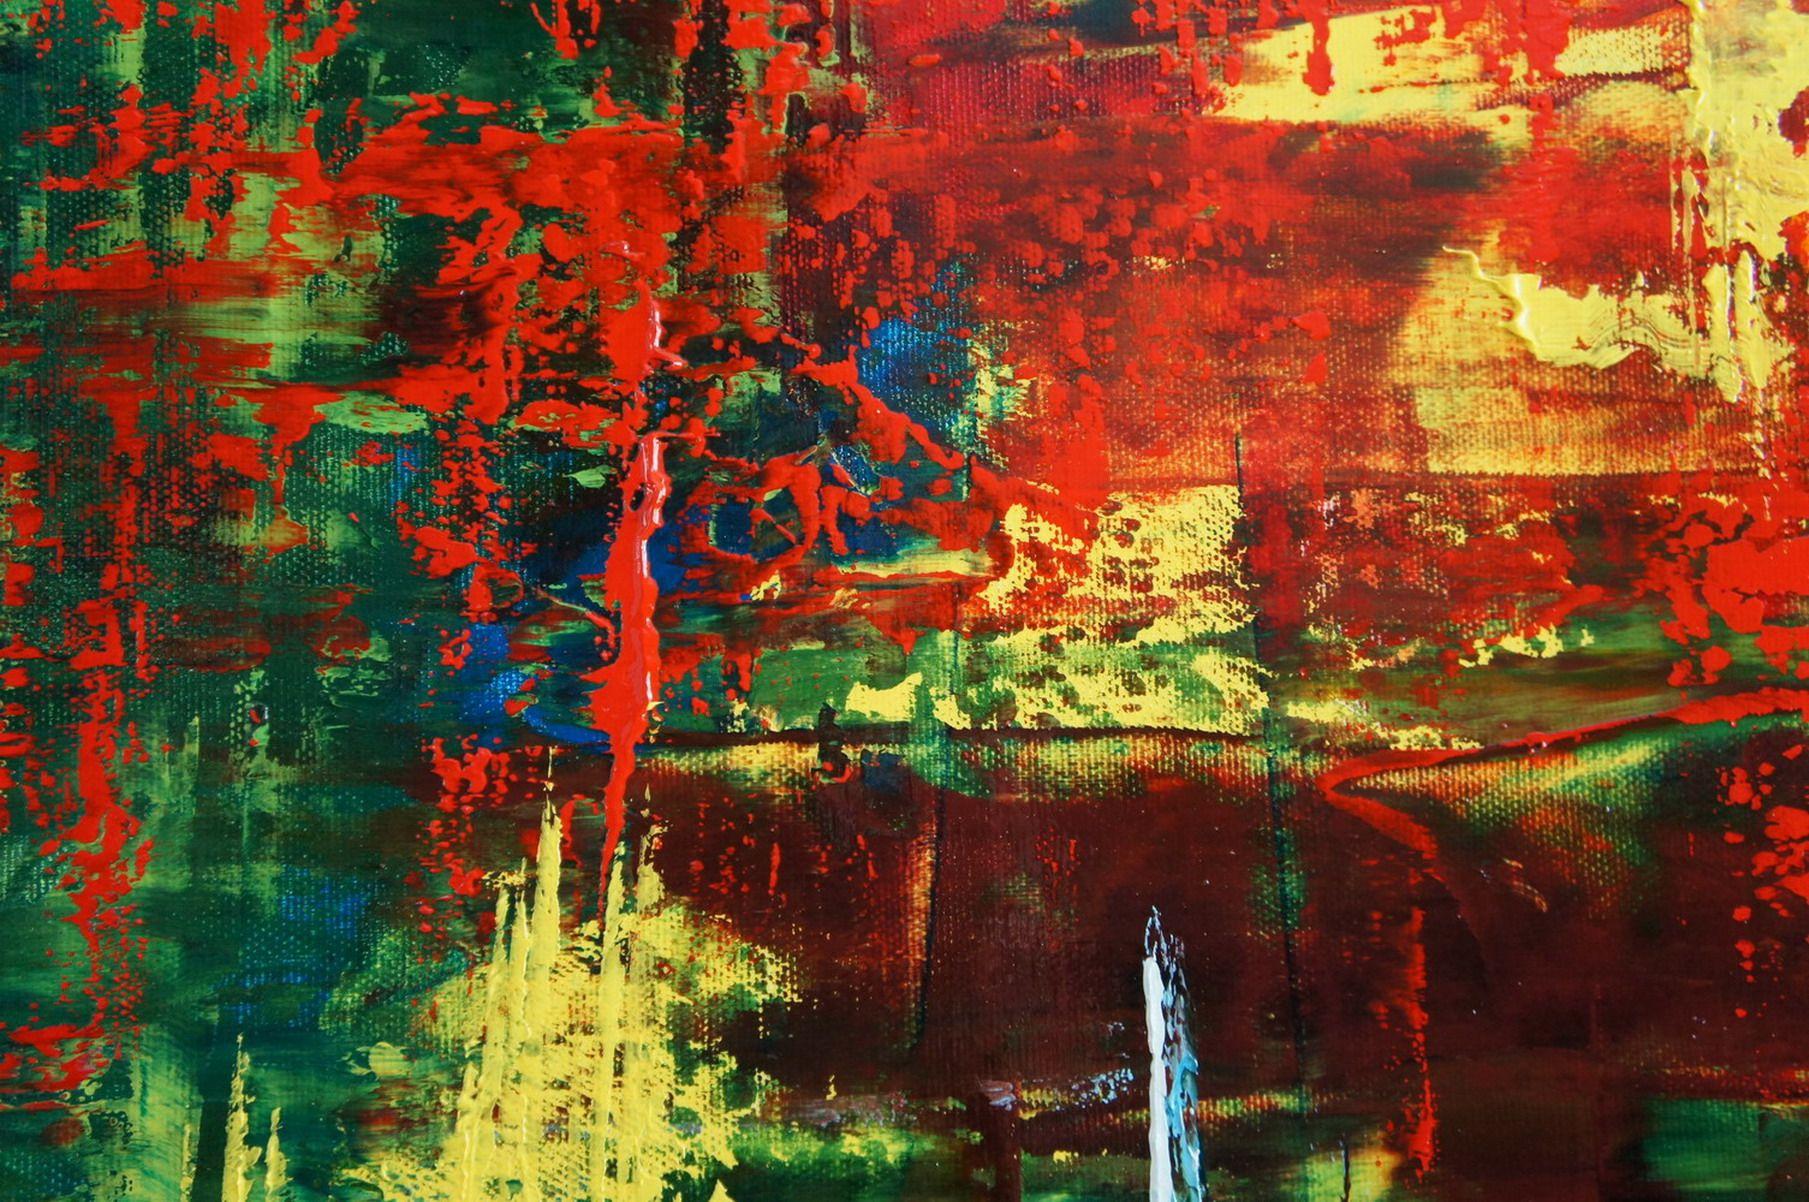 Huge oil painting in mix of green, blue, yellow, and red that seem to vibrate leaving a blur as if in a delirium. ????  Enjoy!    Unique painting using high-quality oil colors on professional gallery canvas stretched over solid wooden 4.5 x 3.0 cm